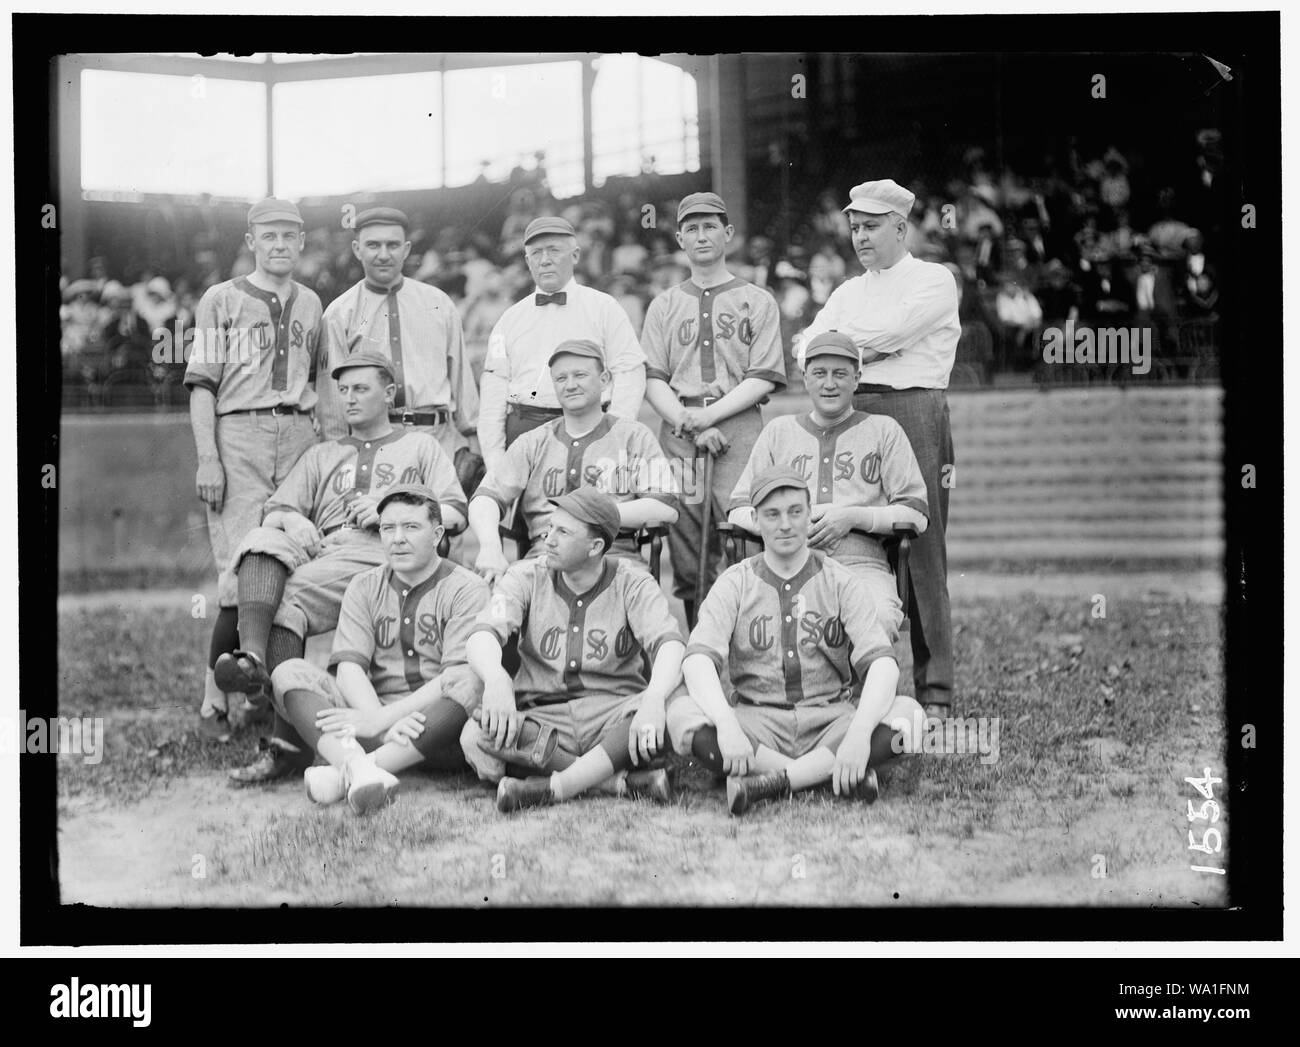 BASEBALL, CONGRESSIONAL. FRONT ROW: KINKEAD OF NEW JERSEY; PAT HARRISON; MURRAY OF MASSACHUSETTS. 2ND ROW: UNIDENTIFIED; EDWARDS OF GEORGIA; McDERMOTT OF ILLINOIS; REAR ROW: WHITE OF OHIO; UNIDENTIFIED; TOM REILLY OF CONNECTICUT; WEBB OF NORTH CAROLINA; RAUCH OF INDIANA Stock Photo